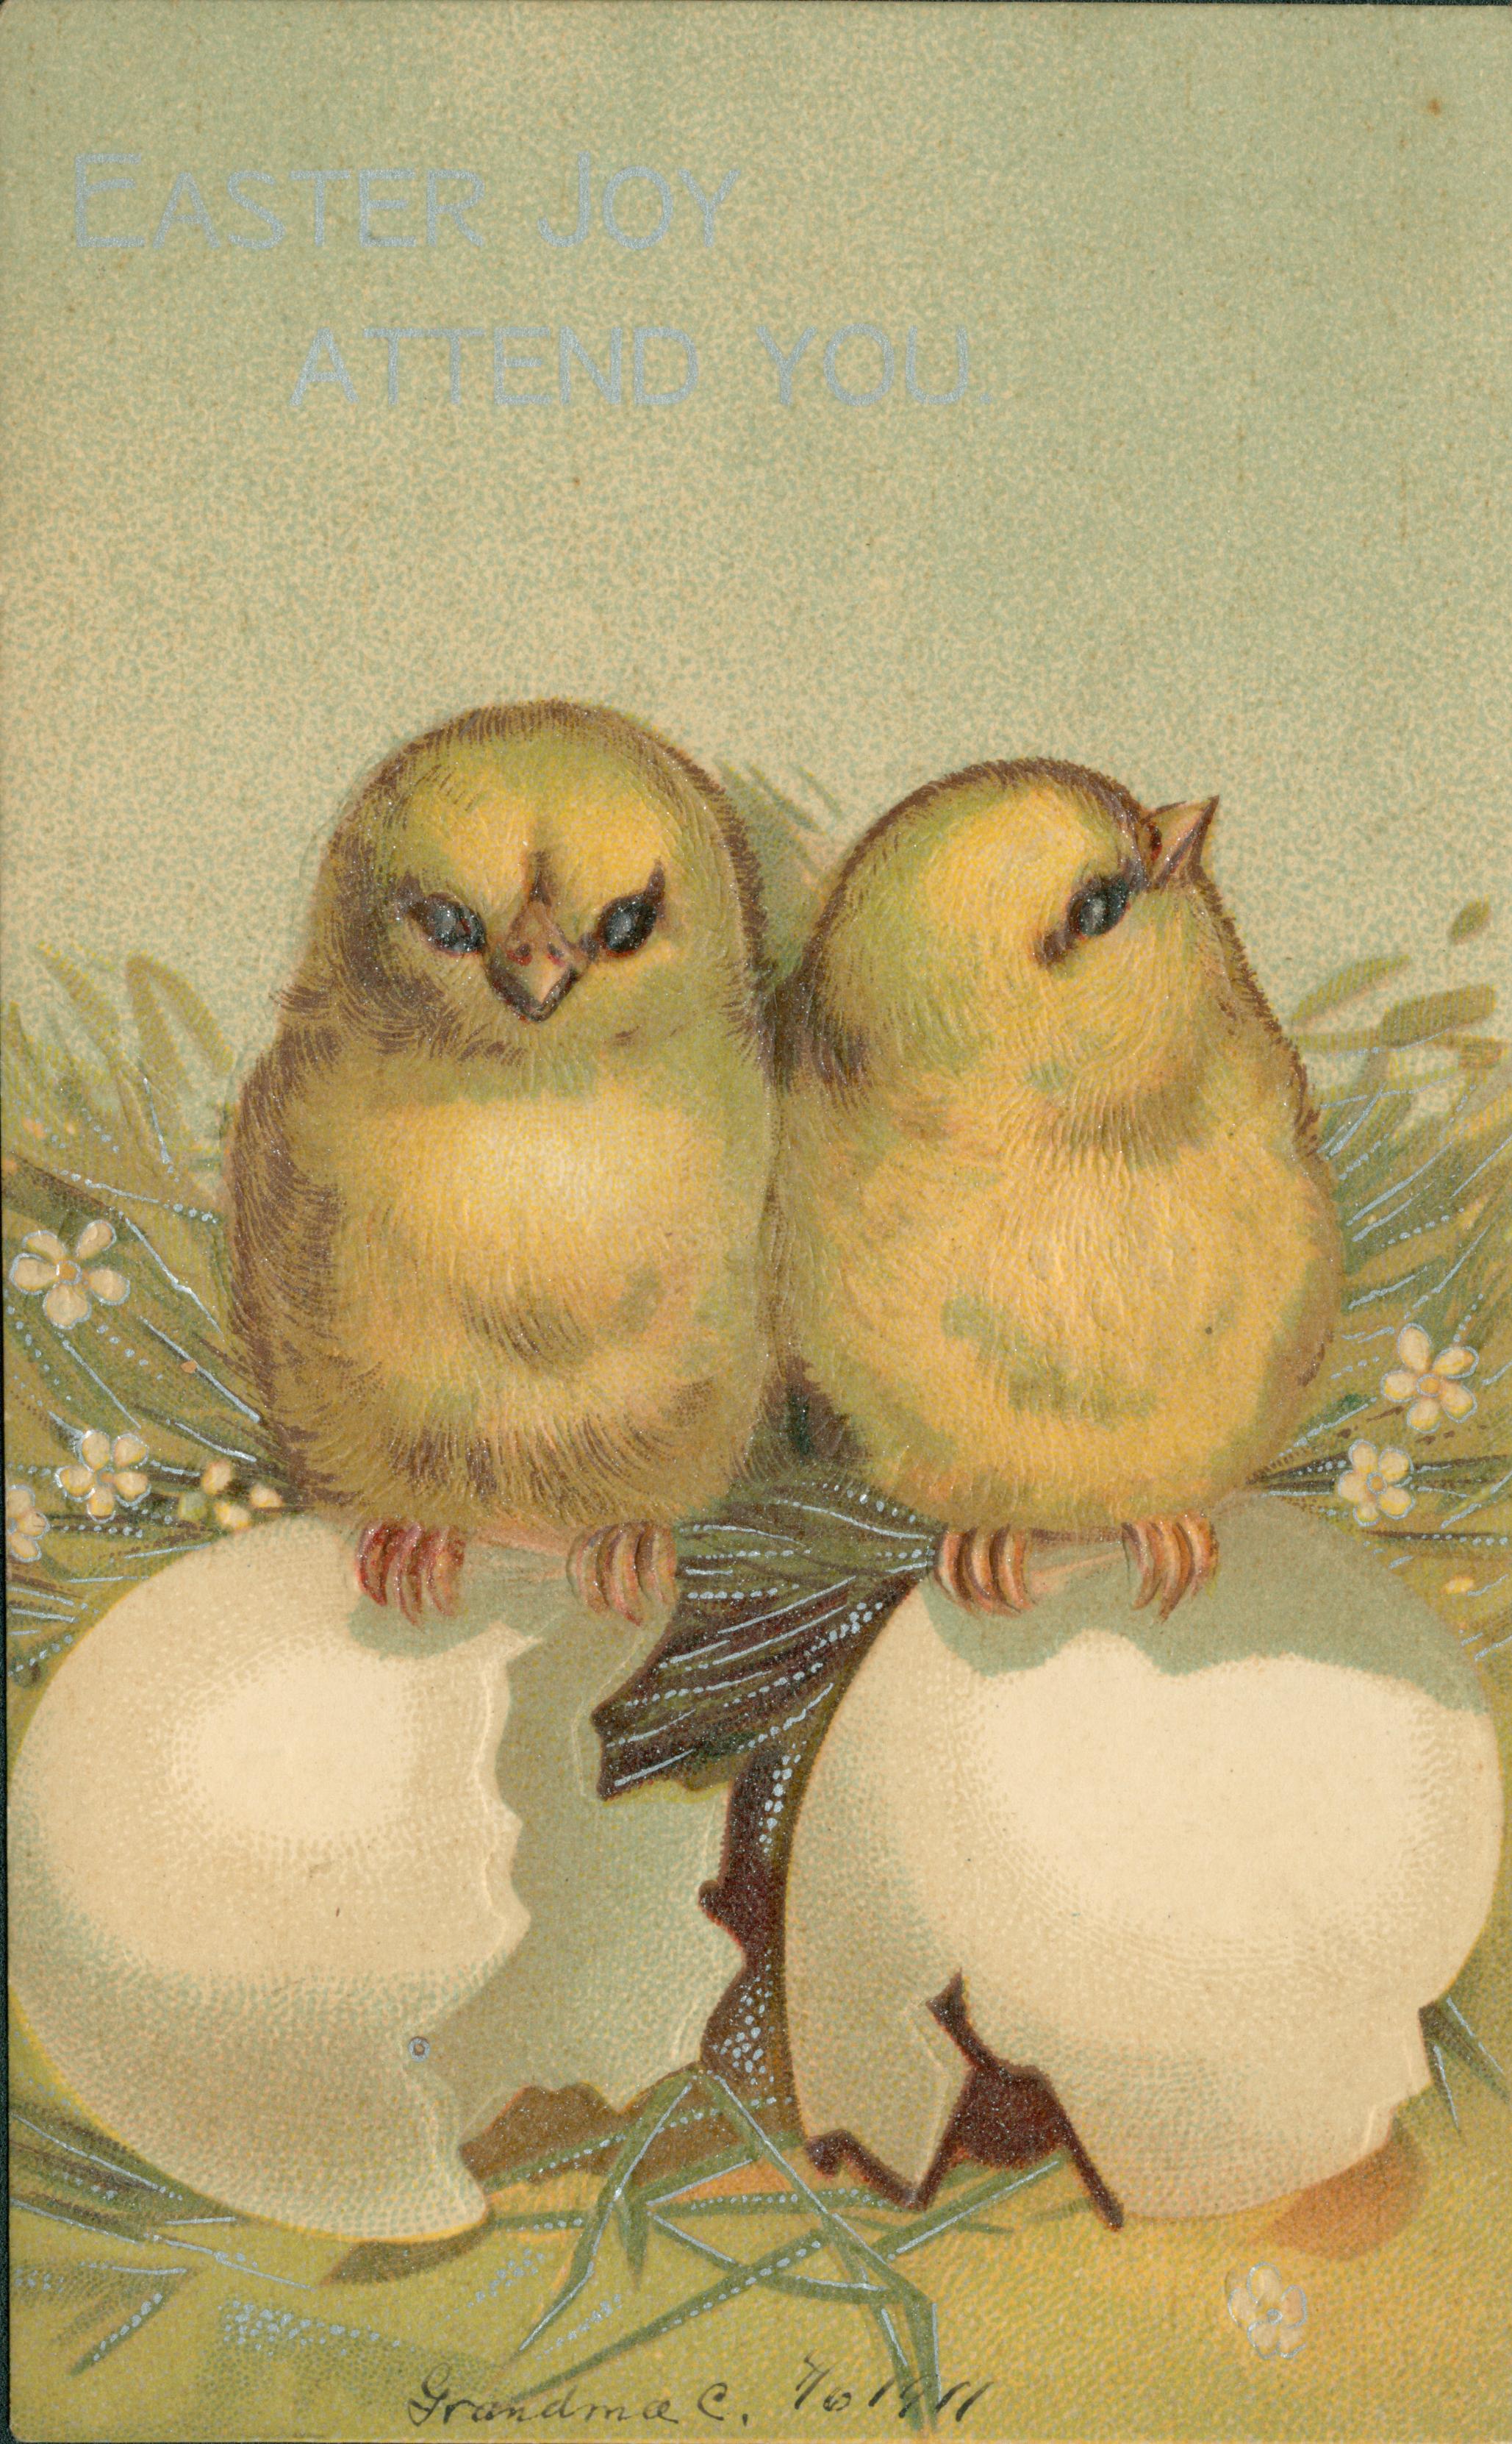 Two chicks standing on their hatched eggs.